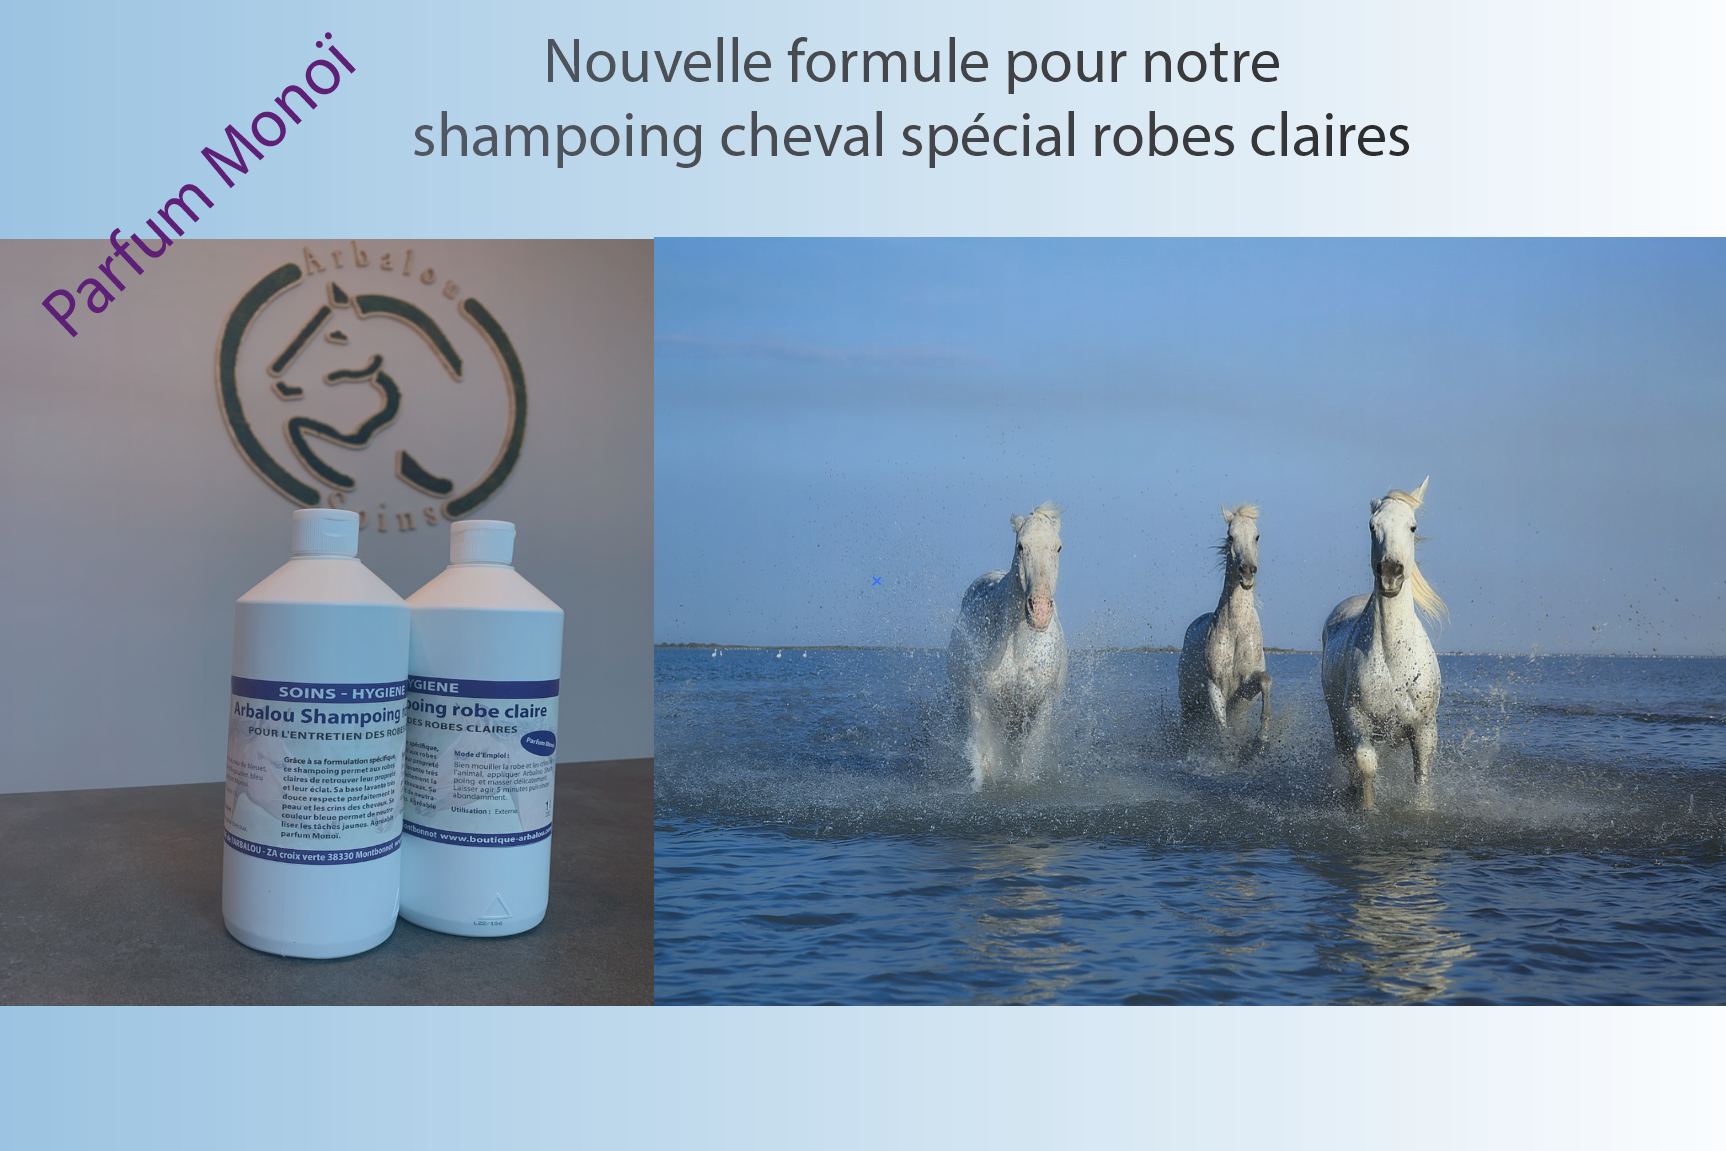 Shampoing cheval robes claires - robes blanches